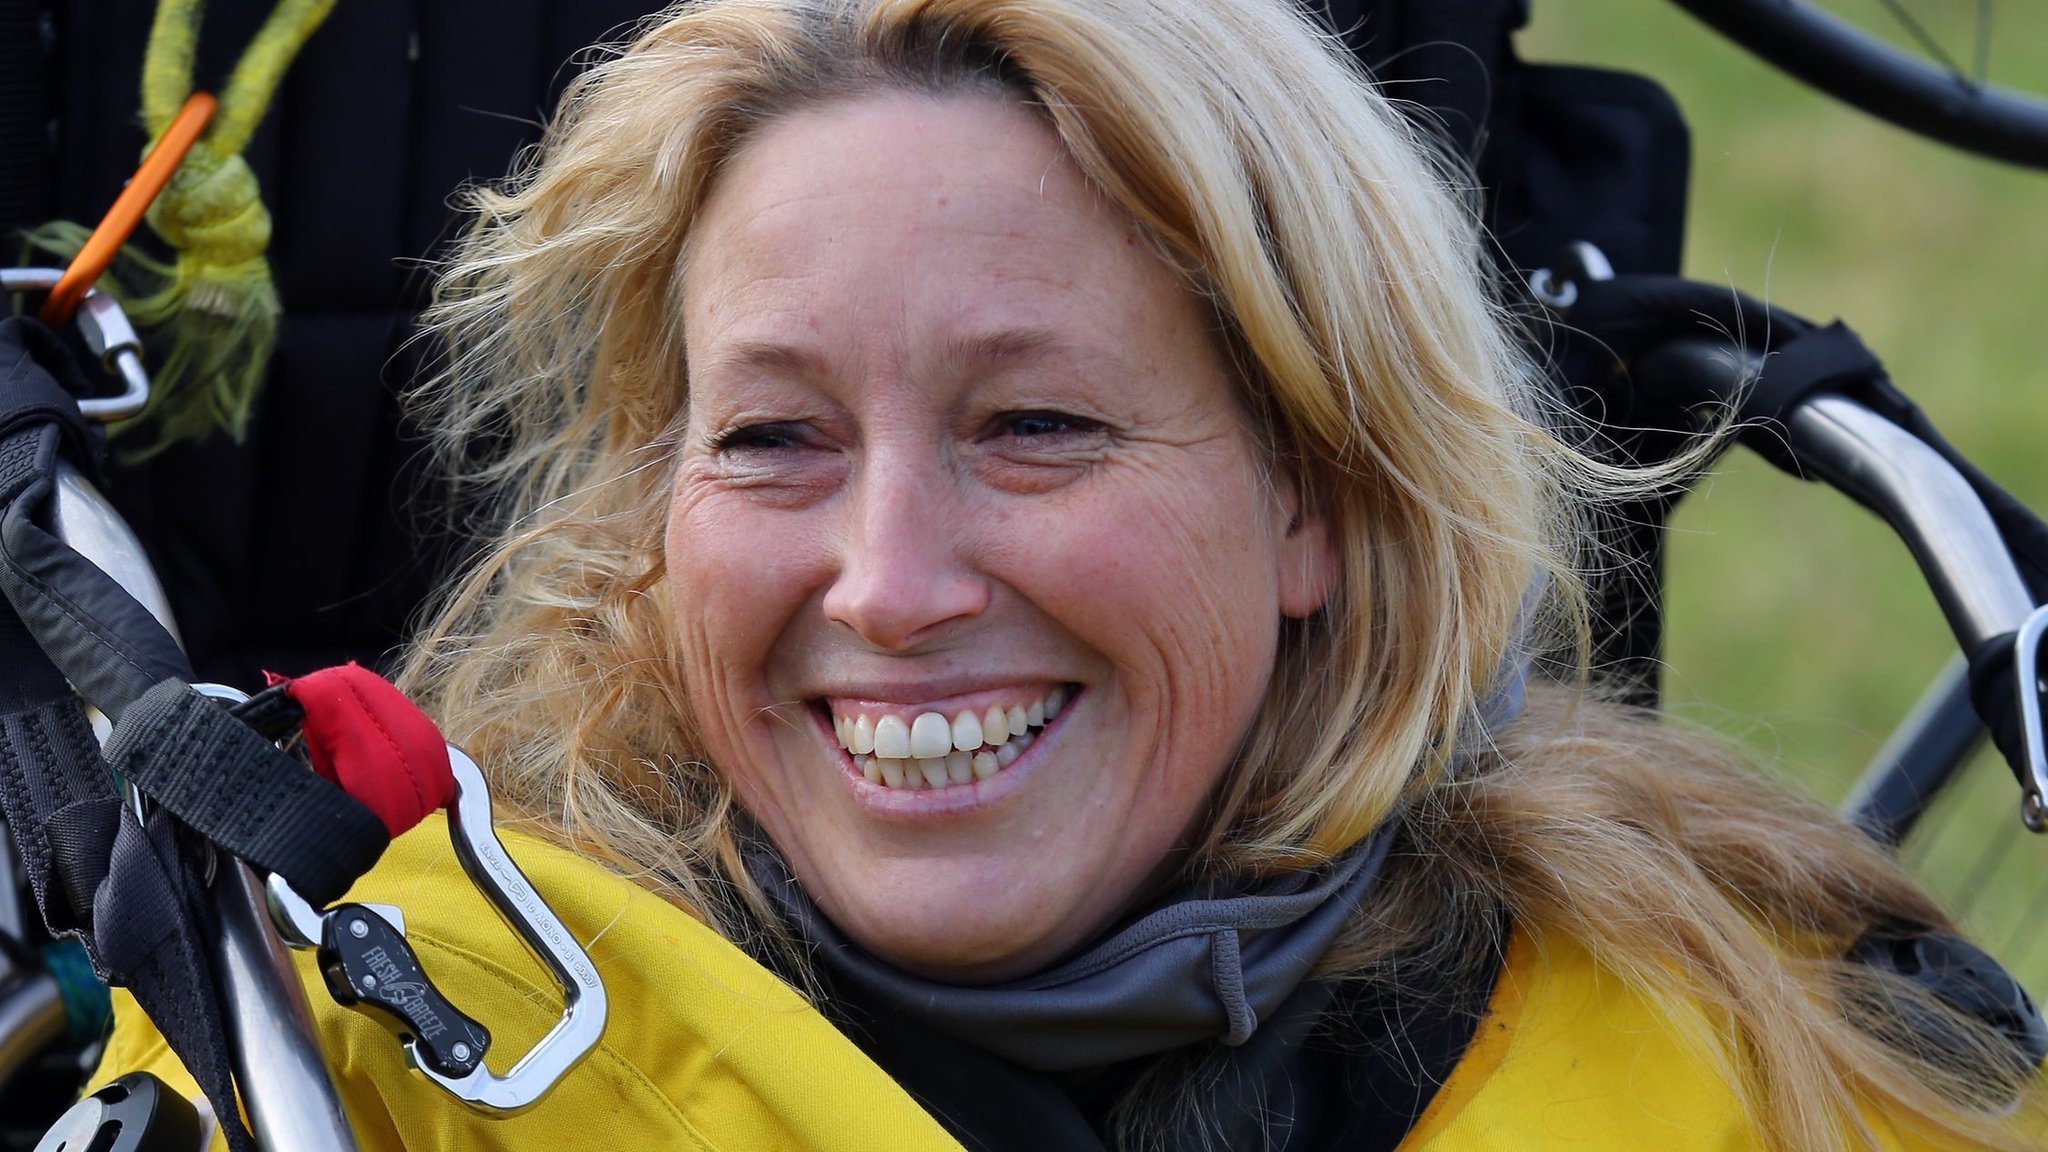 Sacha Dench: Woman flying with swans set for final flight - CBBC Newsround